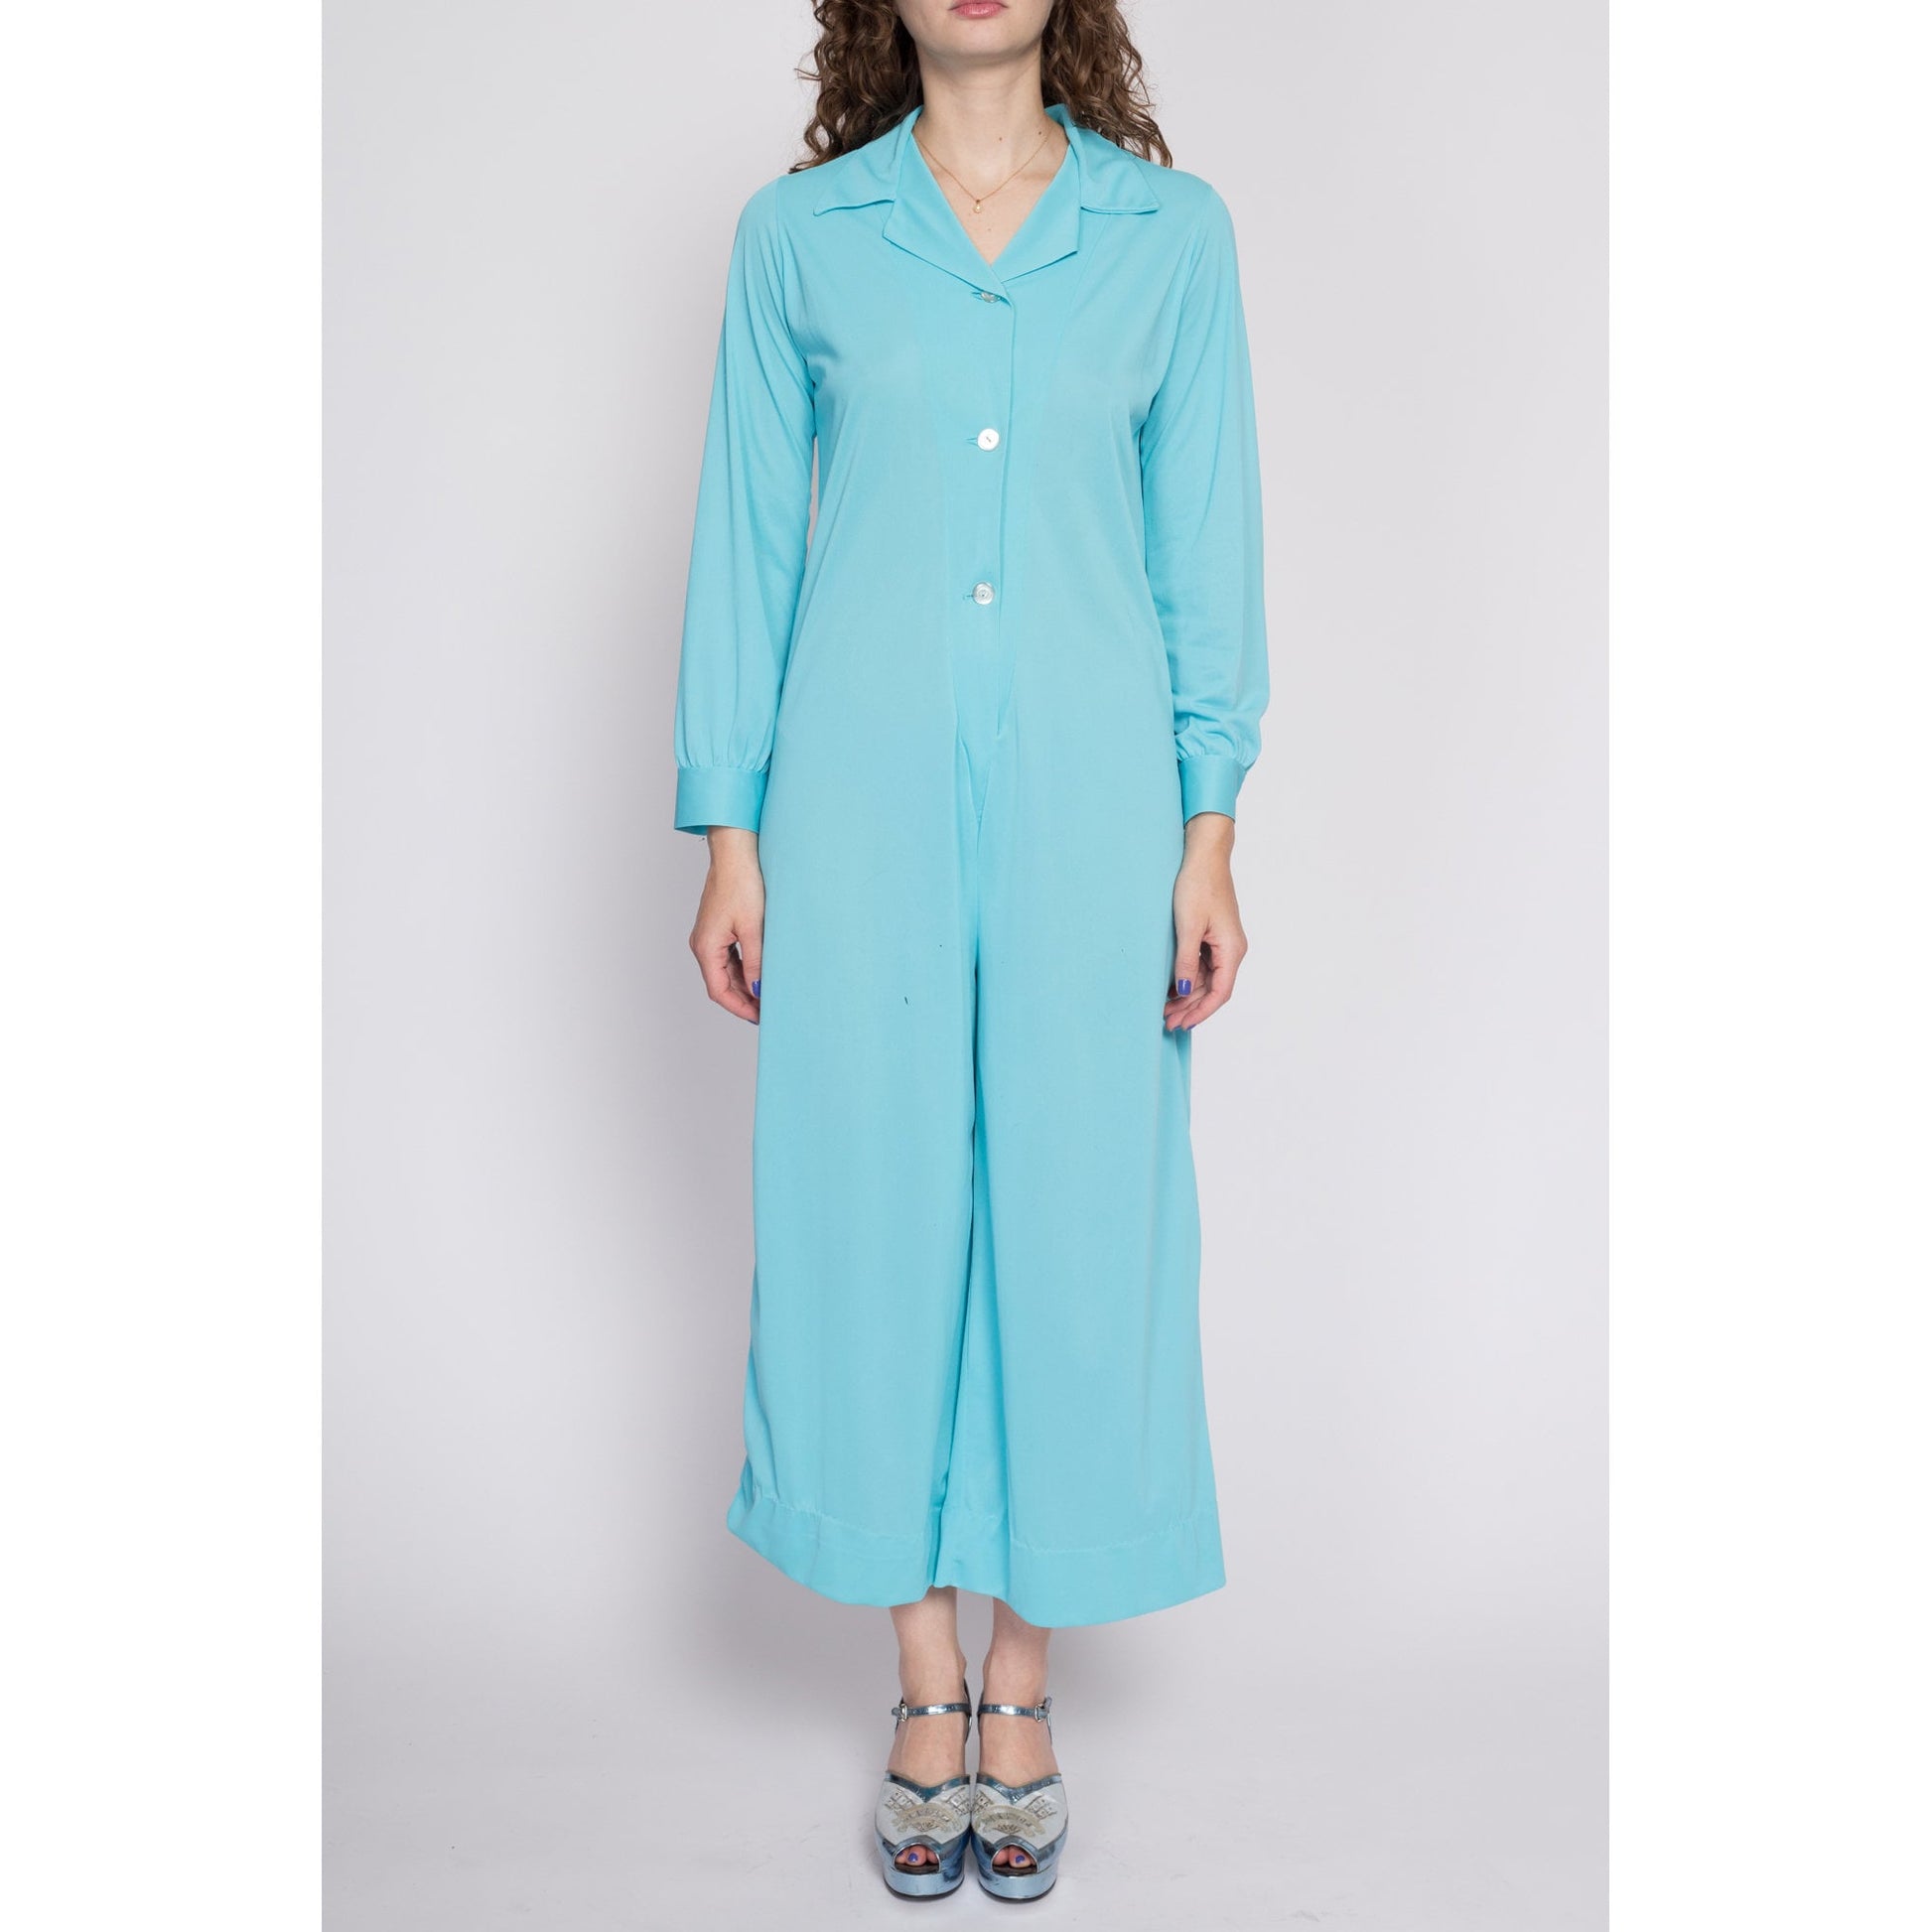 Medium 70s Retro Blue Disco Jumpsuit As Is | Vintage Button Up Long Sleeve Collared Leisure Suit